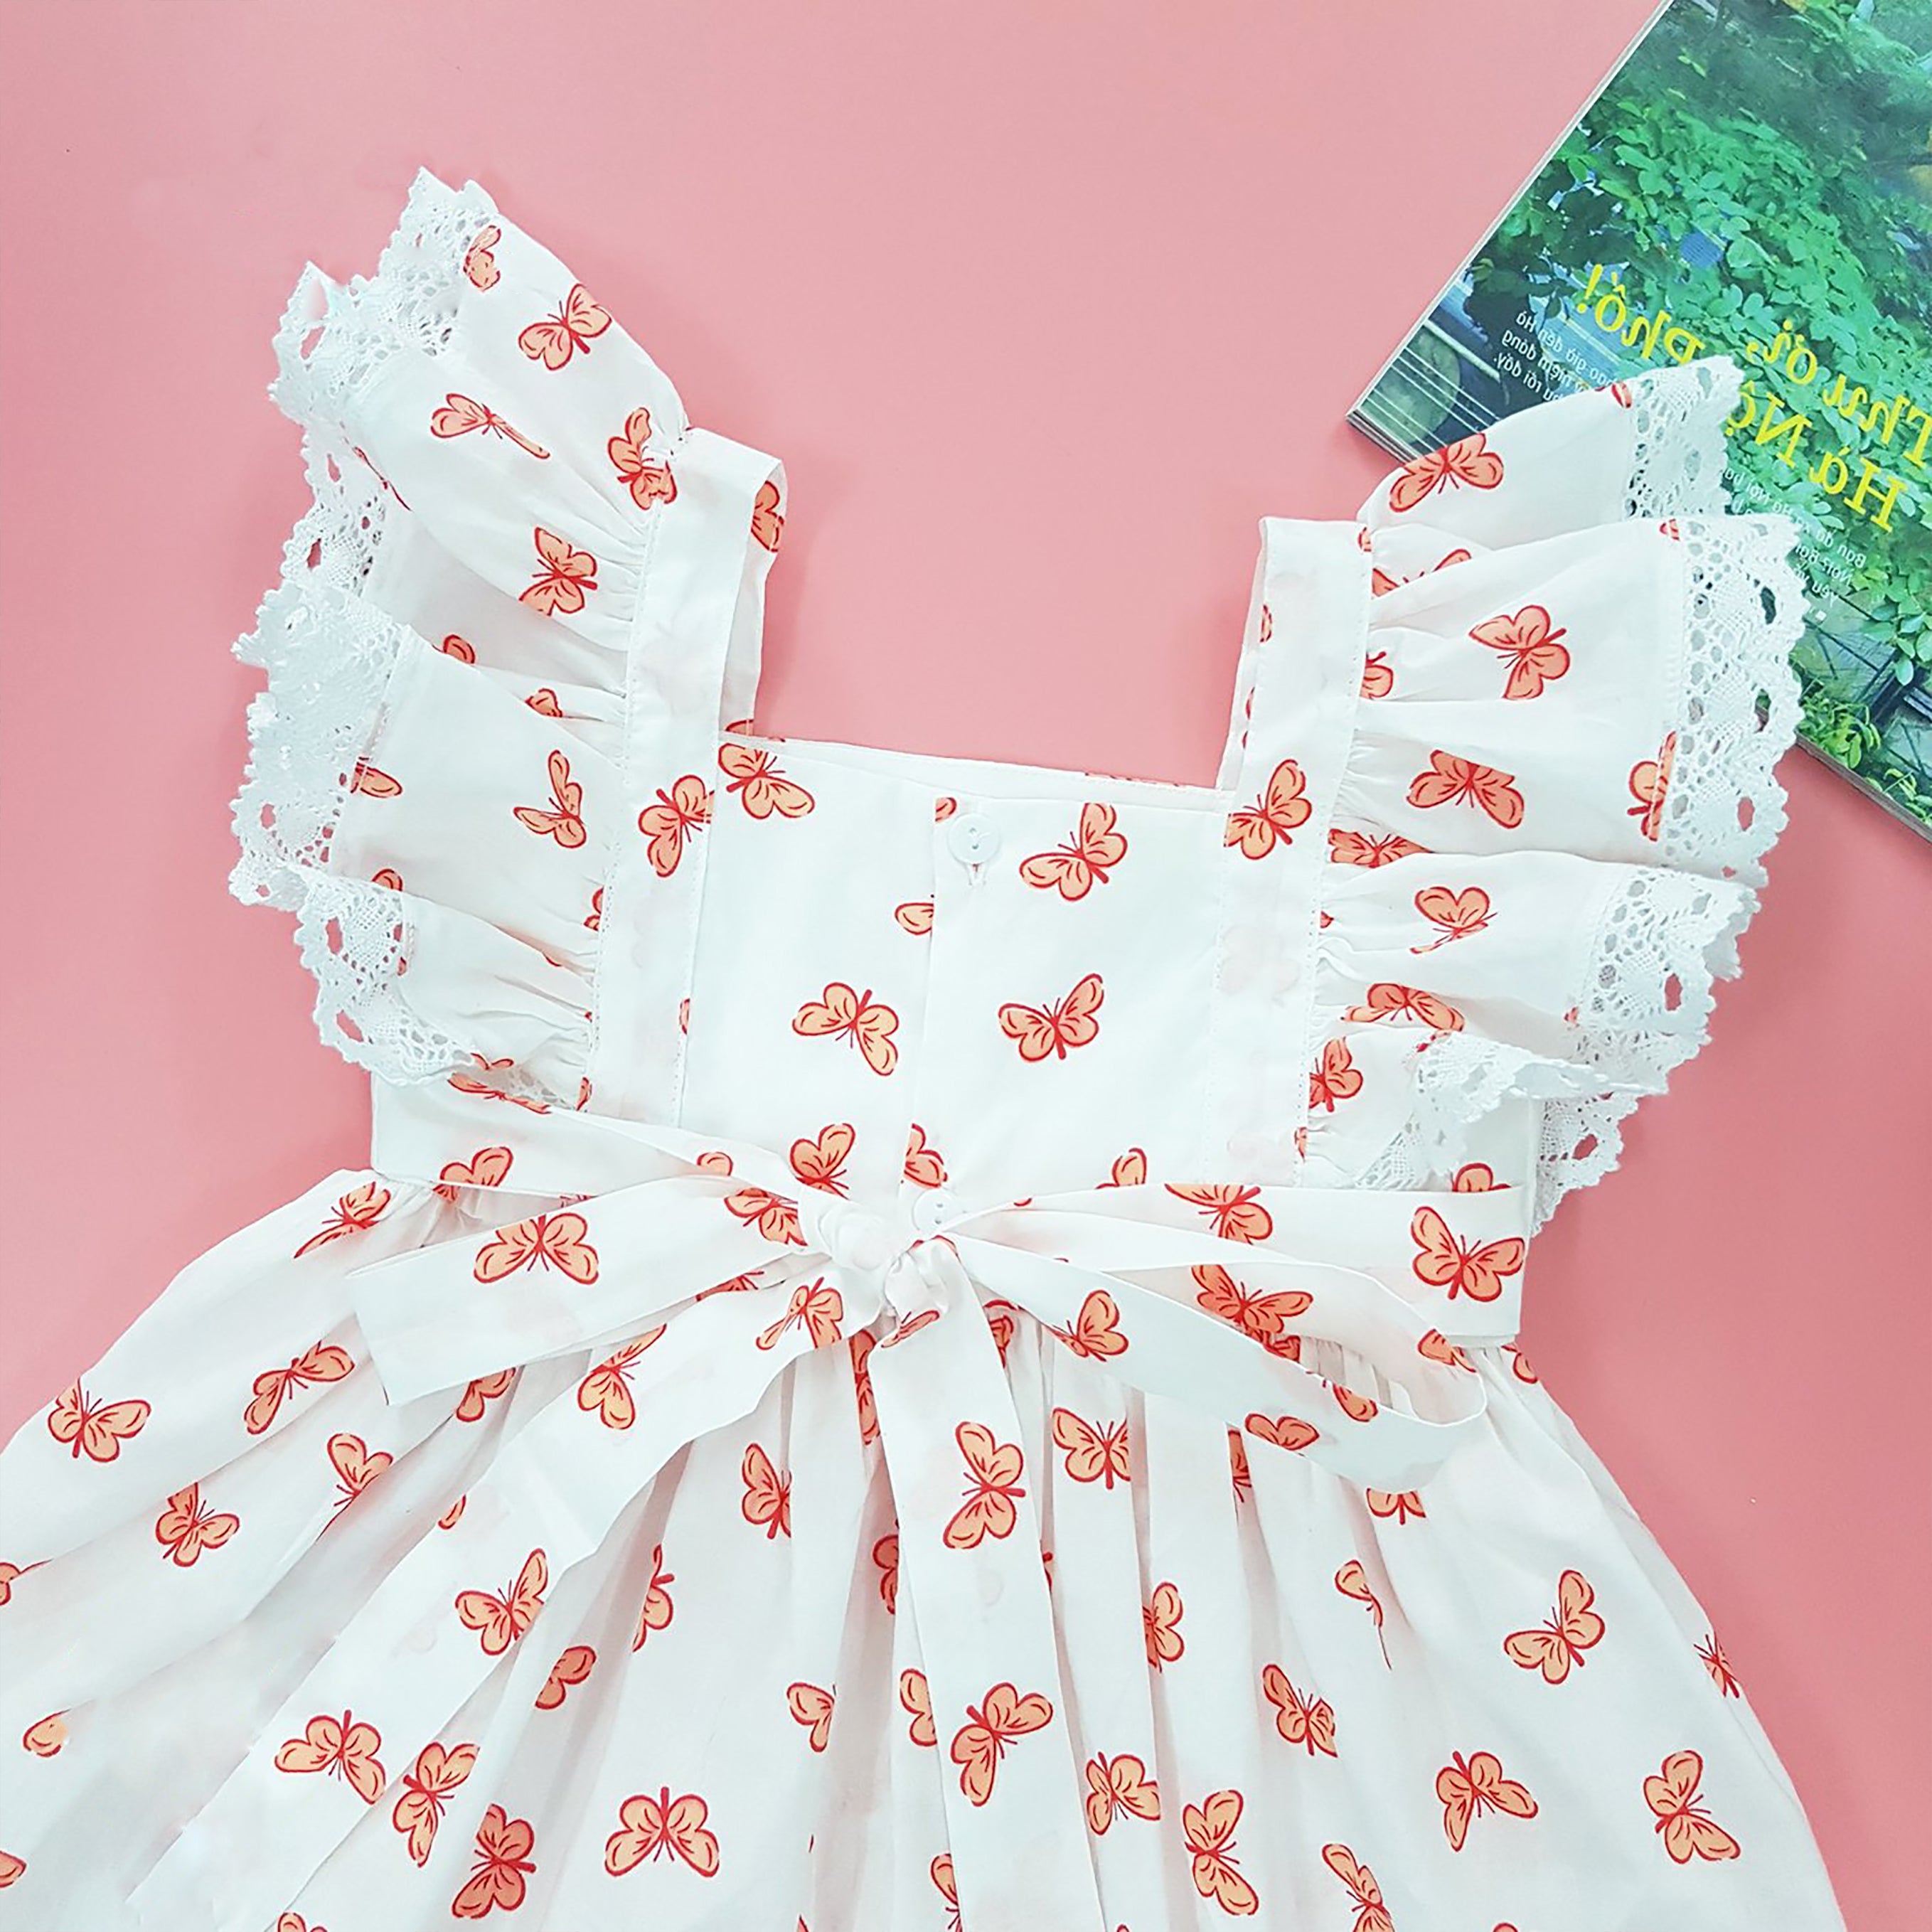 Baby Toddler Little Girls Spring Summer Flutter Sleeves Ruffle Lace Cotton Woven Dress - White Butterfly - Angeline Kids